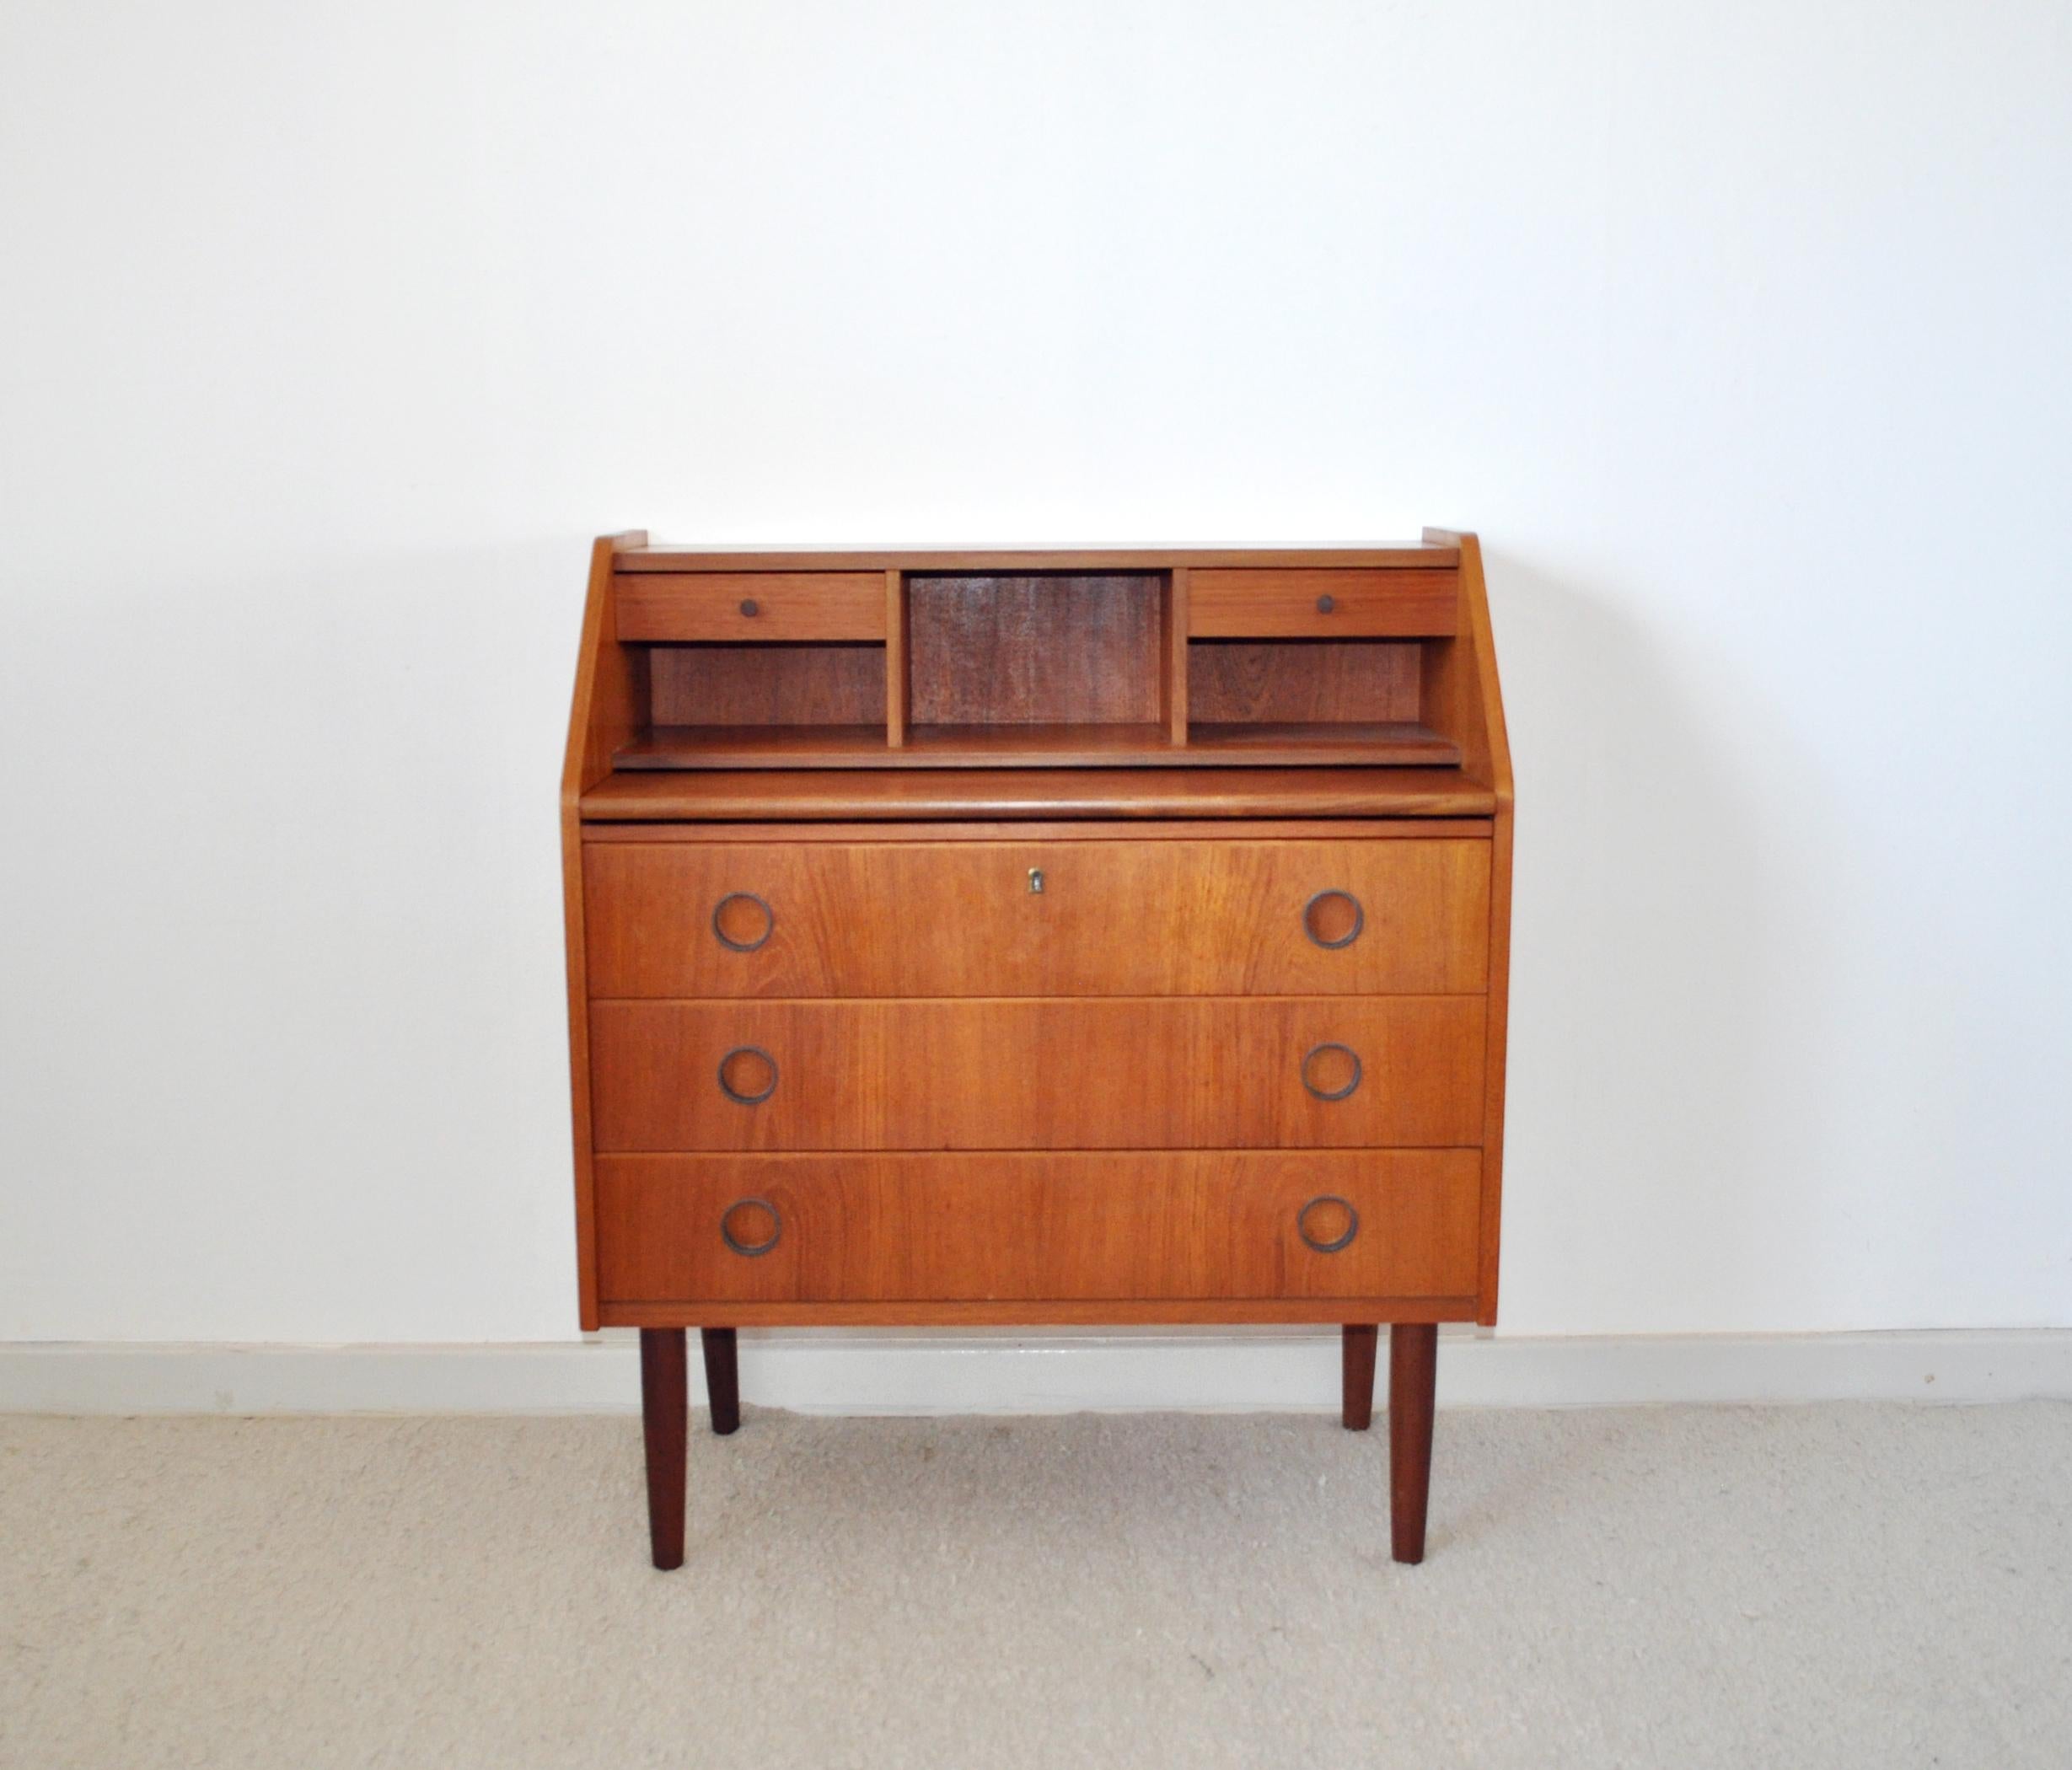 Swedish Secretaire or chest of drawers, 1970s.
Teak veneer and legs made of solid teak.
The top has cubby holes and 2 small drawers. Lower section has three large drawers with round plastic handles. One divided and painted. The desk can be pulled